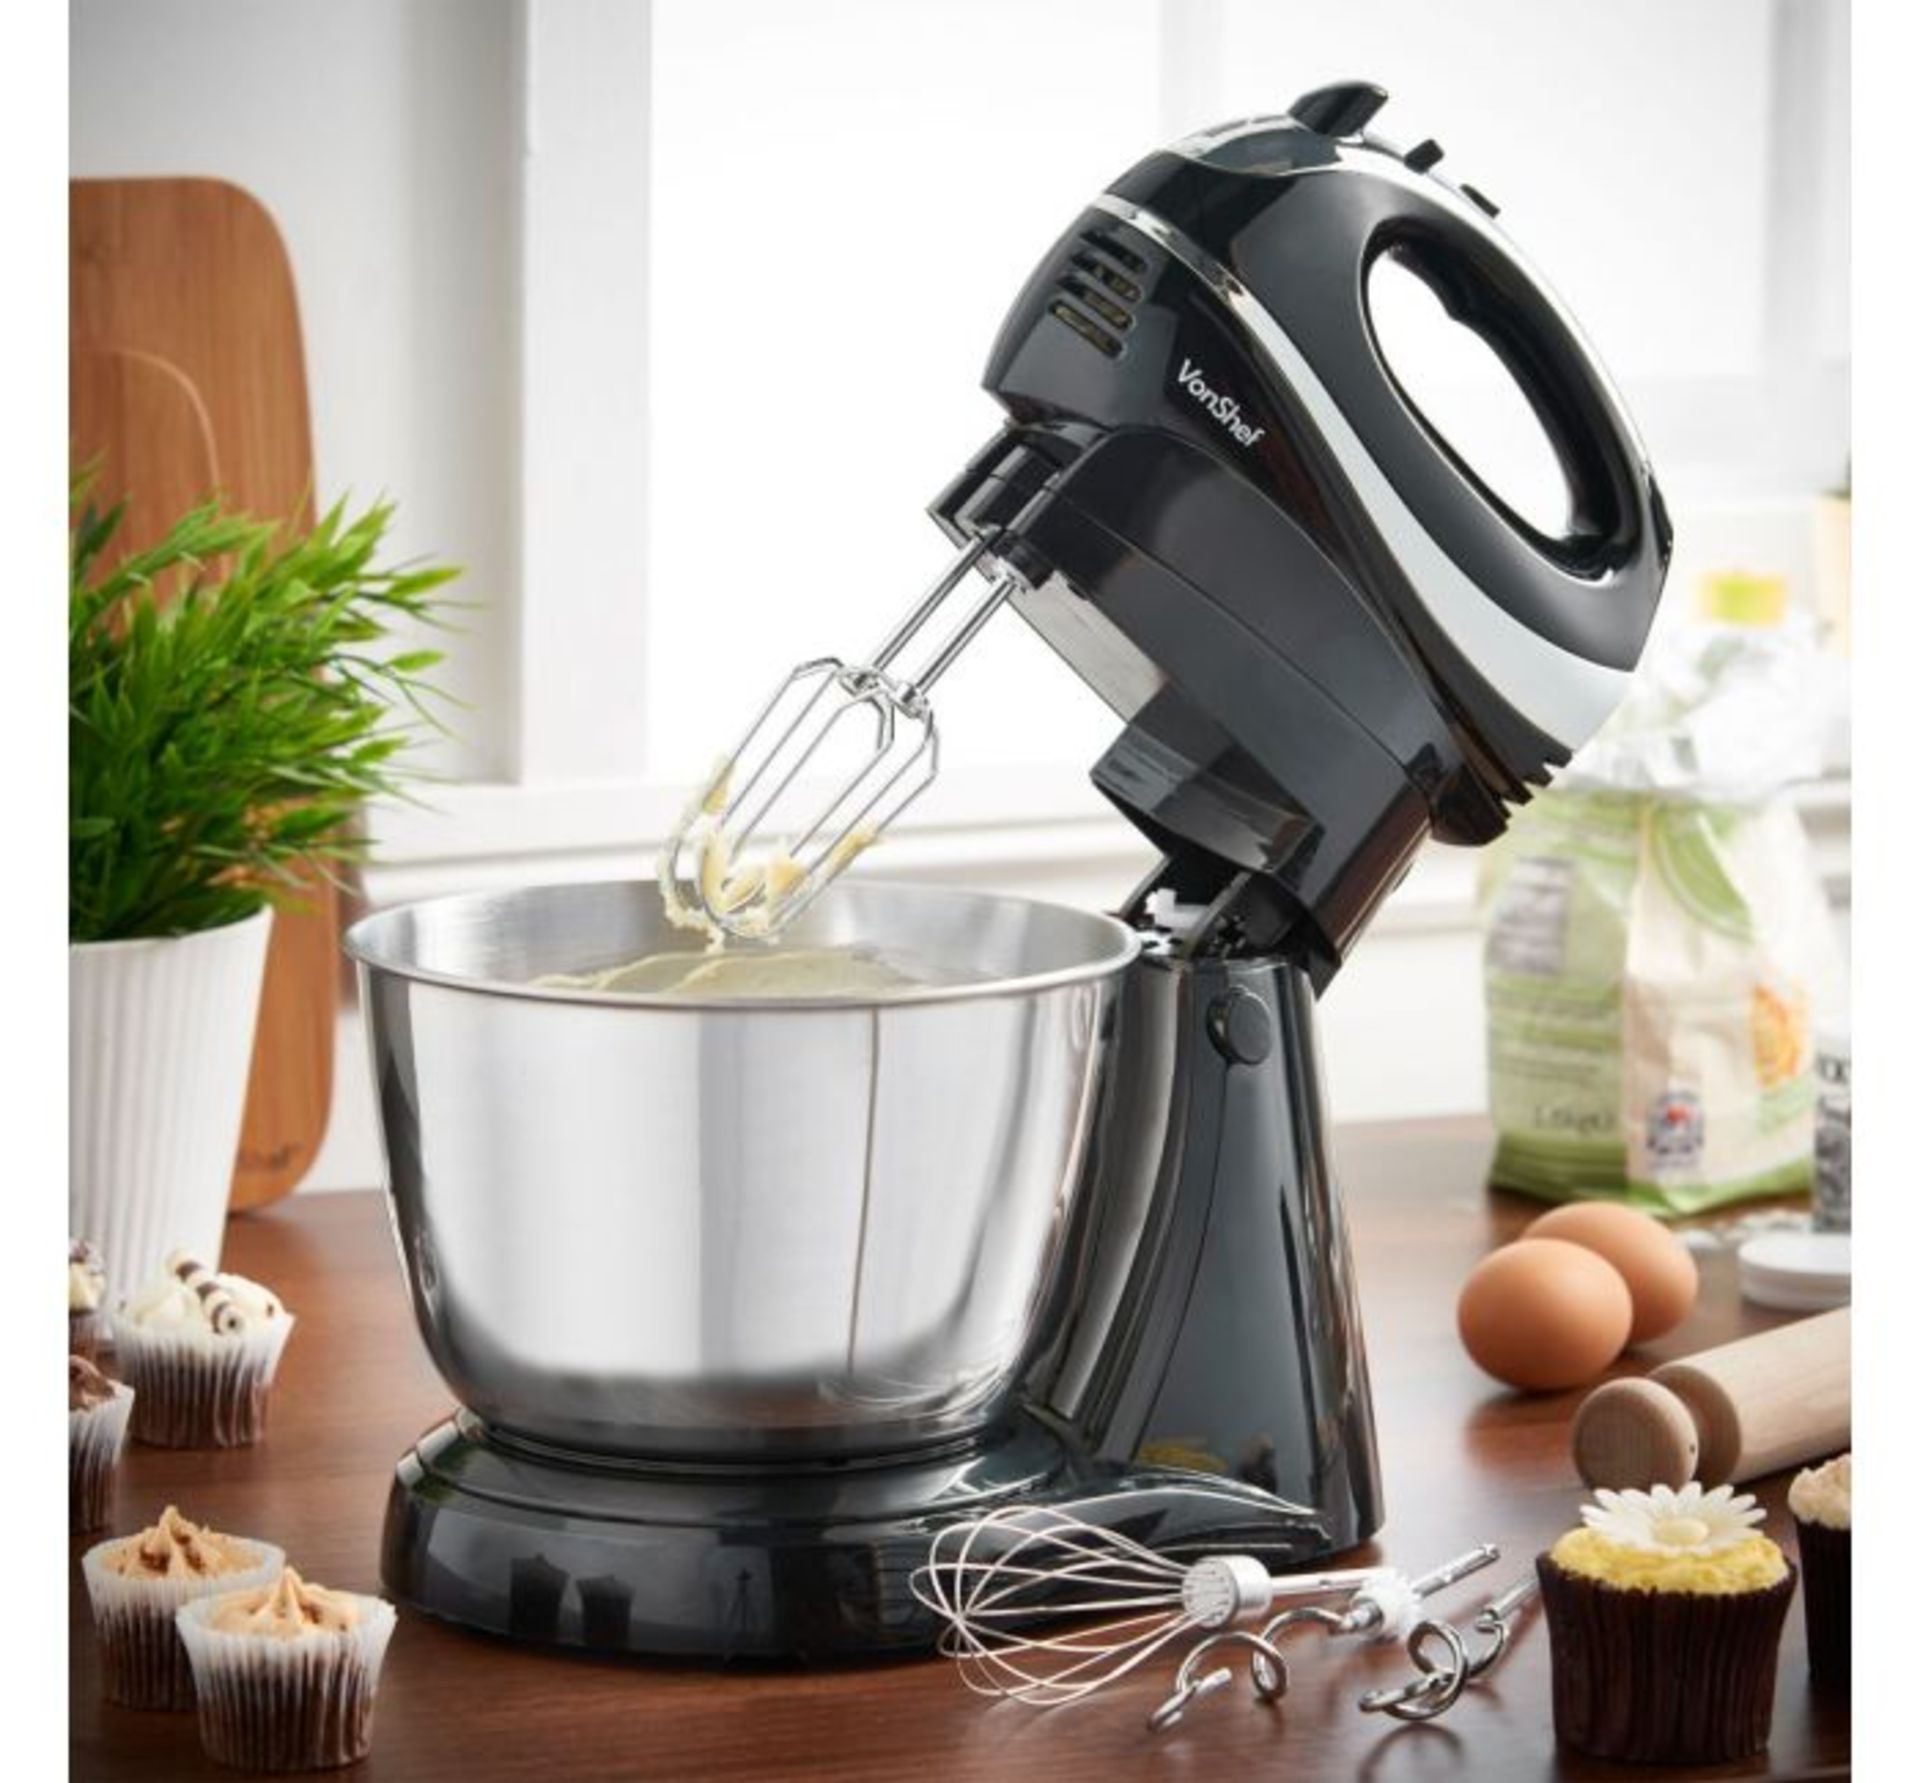 (MY10) Black Hand & Stand Mixer 2 in 1 stand mixer and hand mixer - compact, versatile and fun...